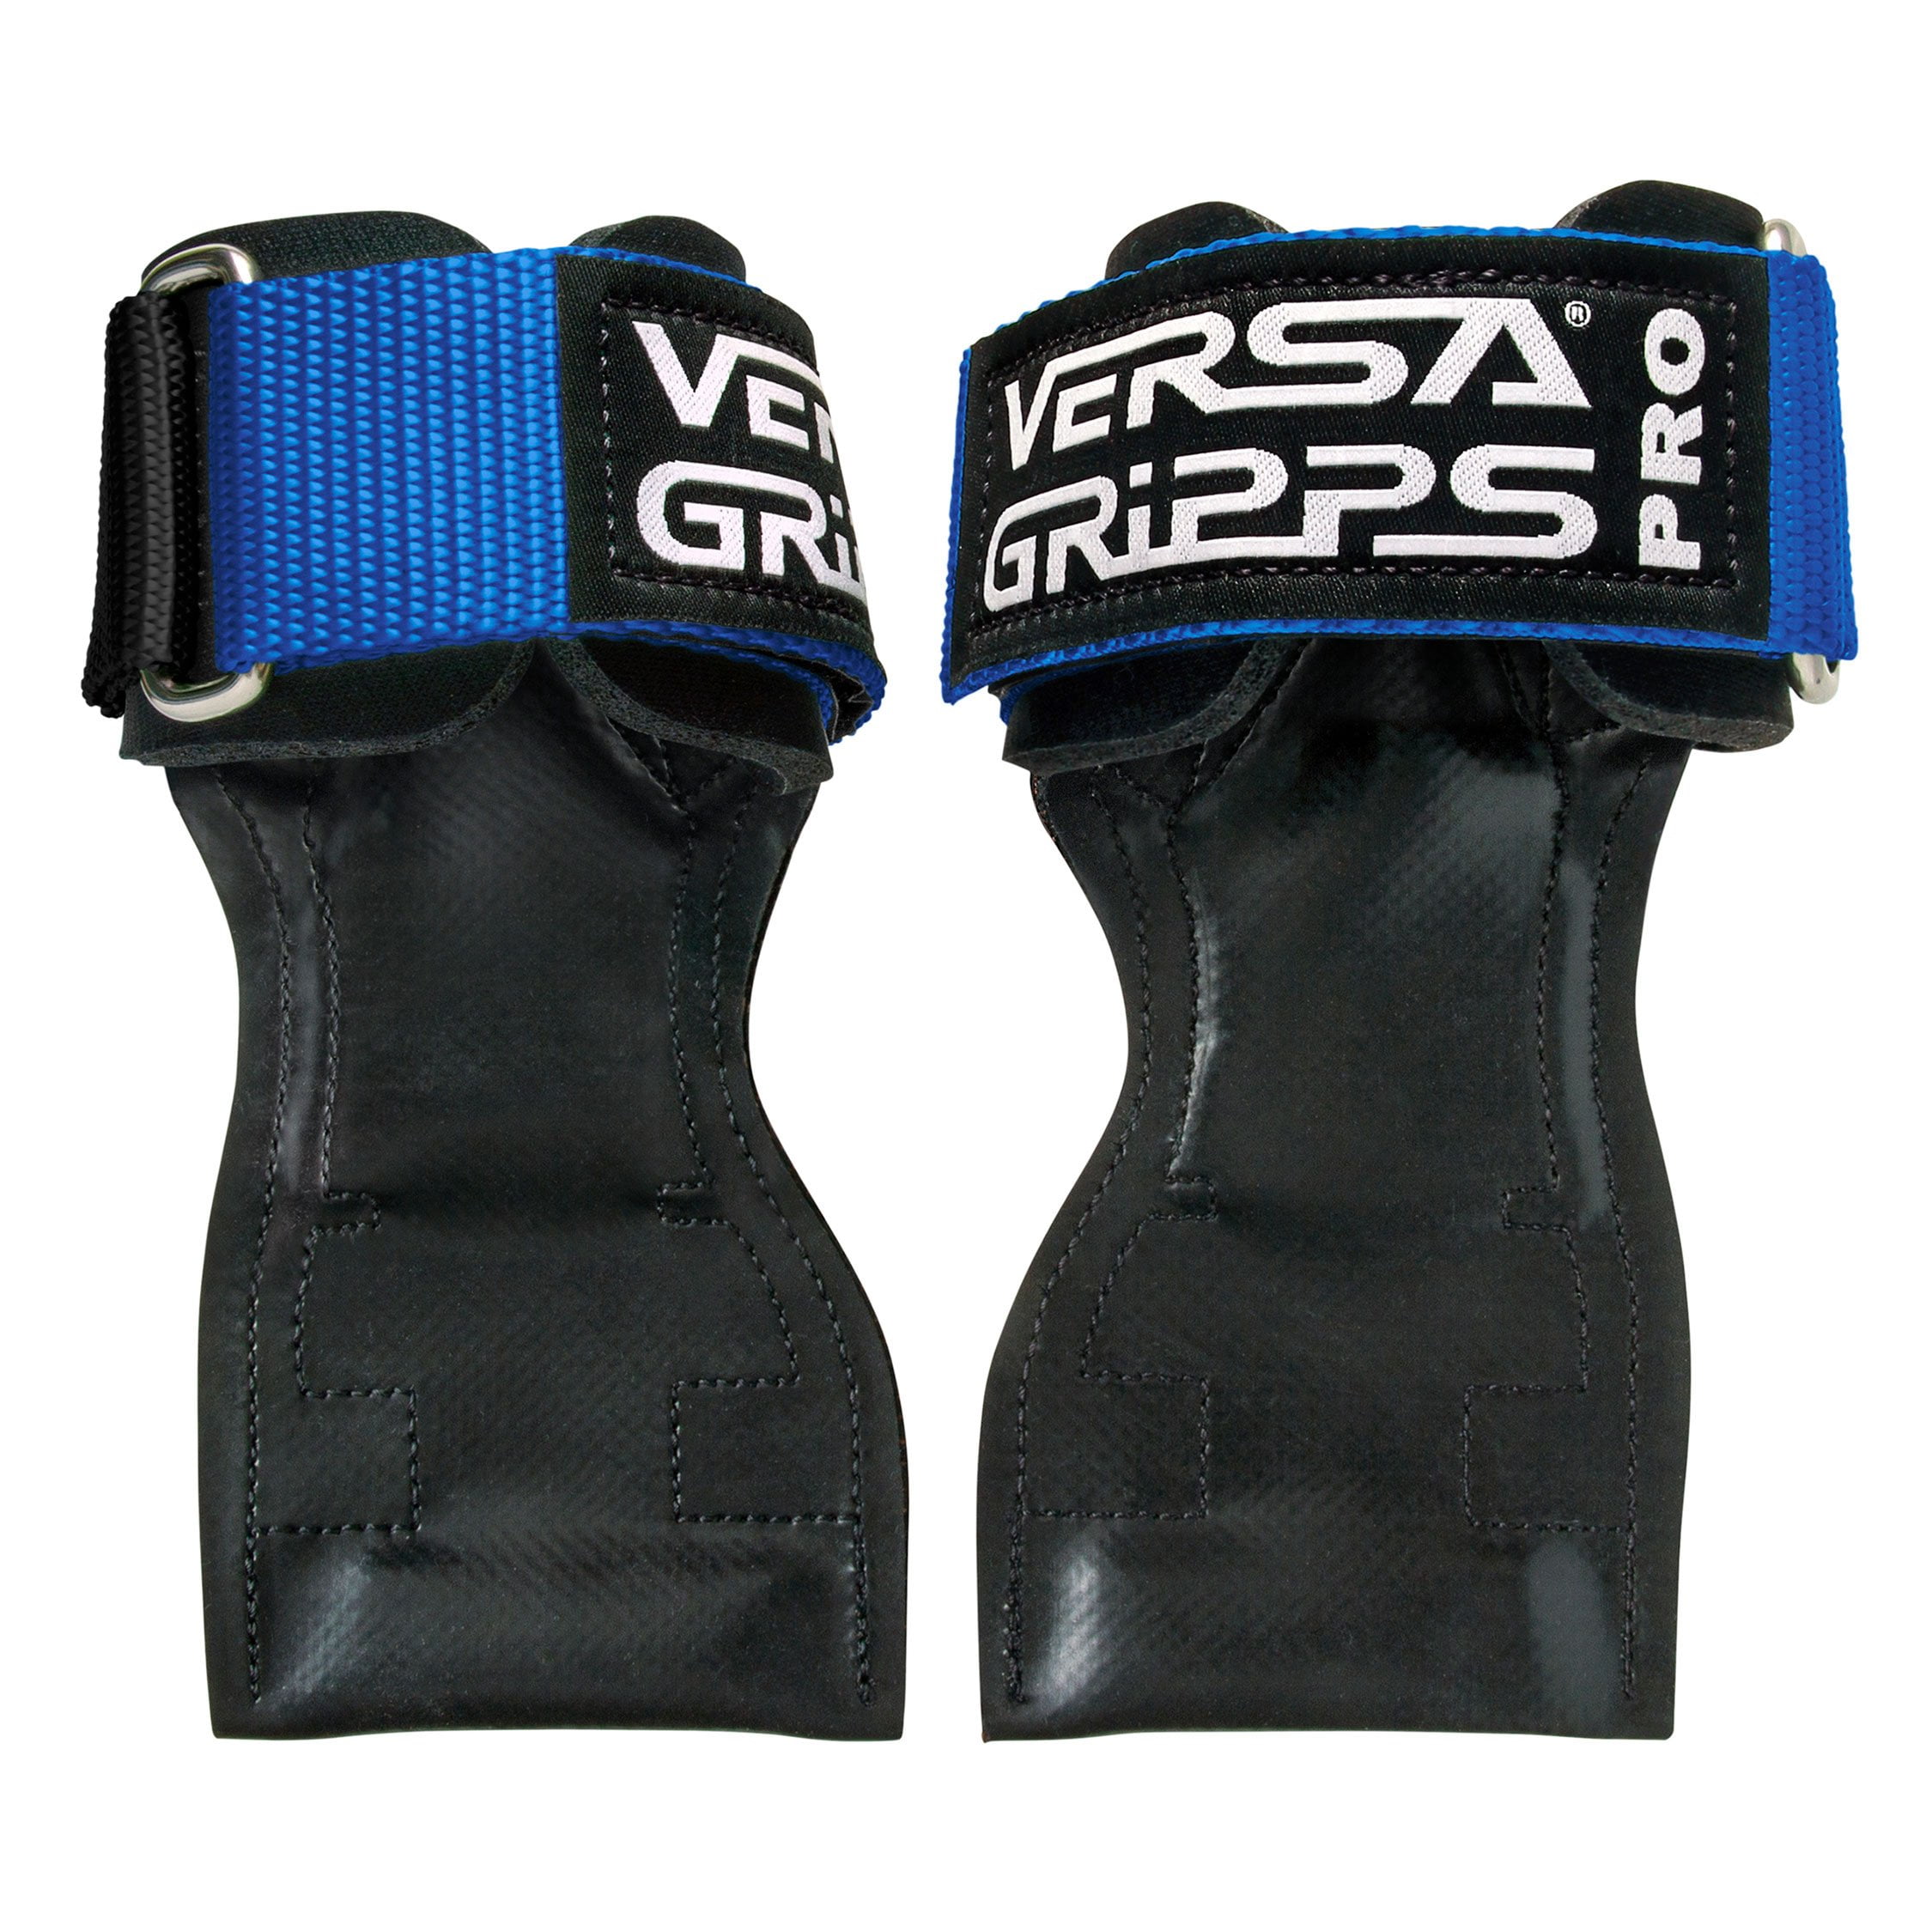 Versa Gripps Pro Authentic Weight Lifting Grip, Exercise Wraps 